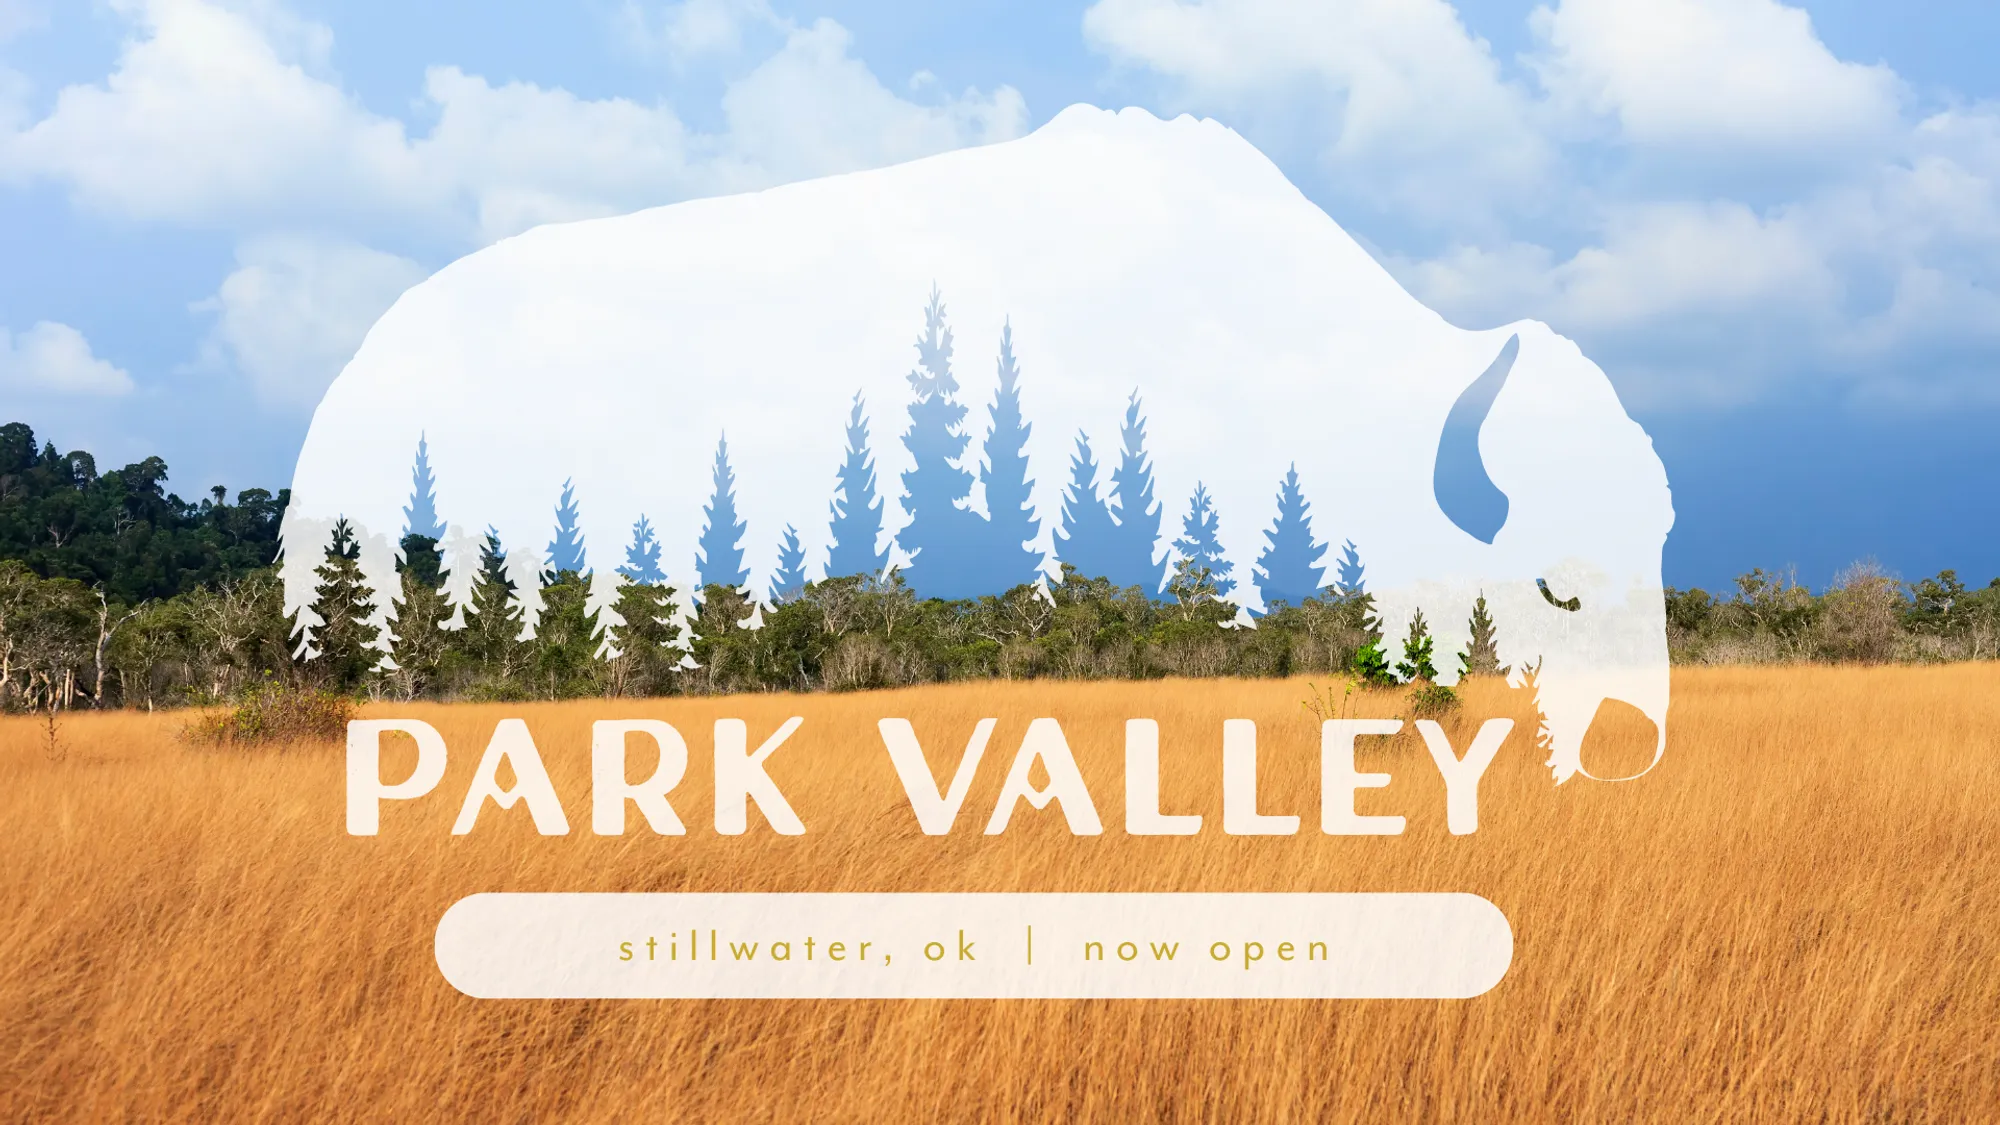  Park Valley - Now Open